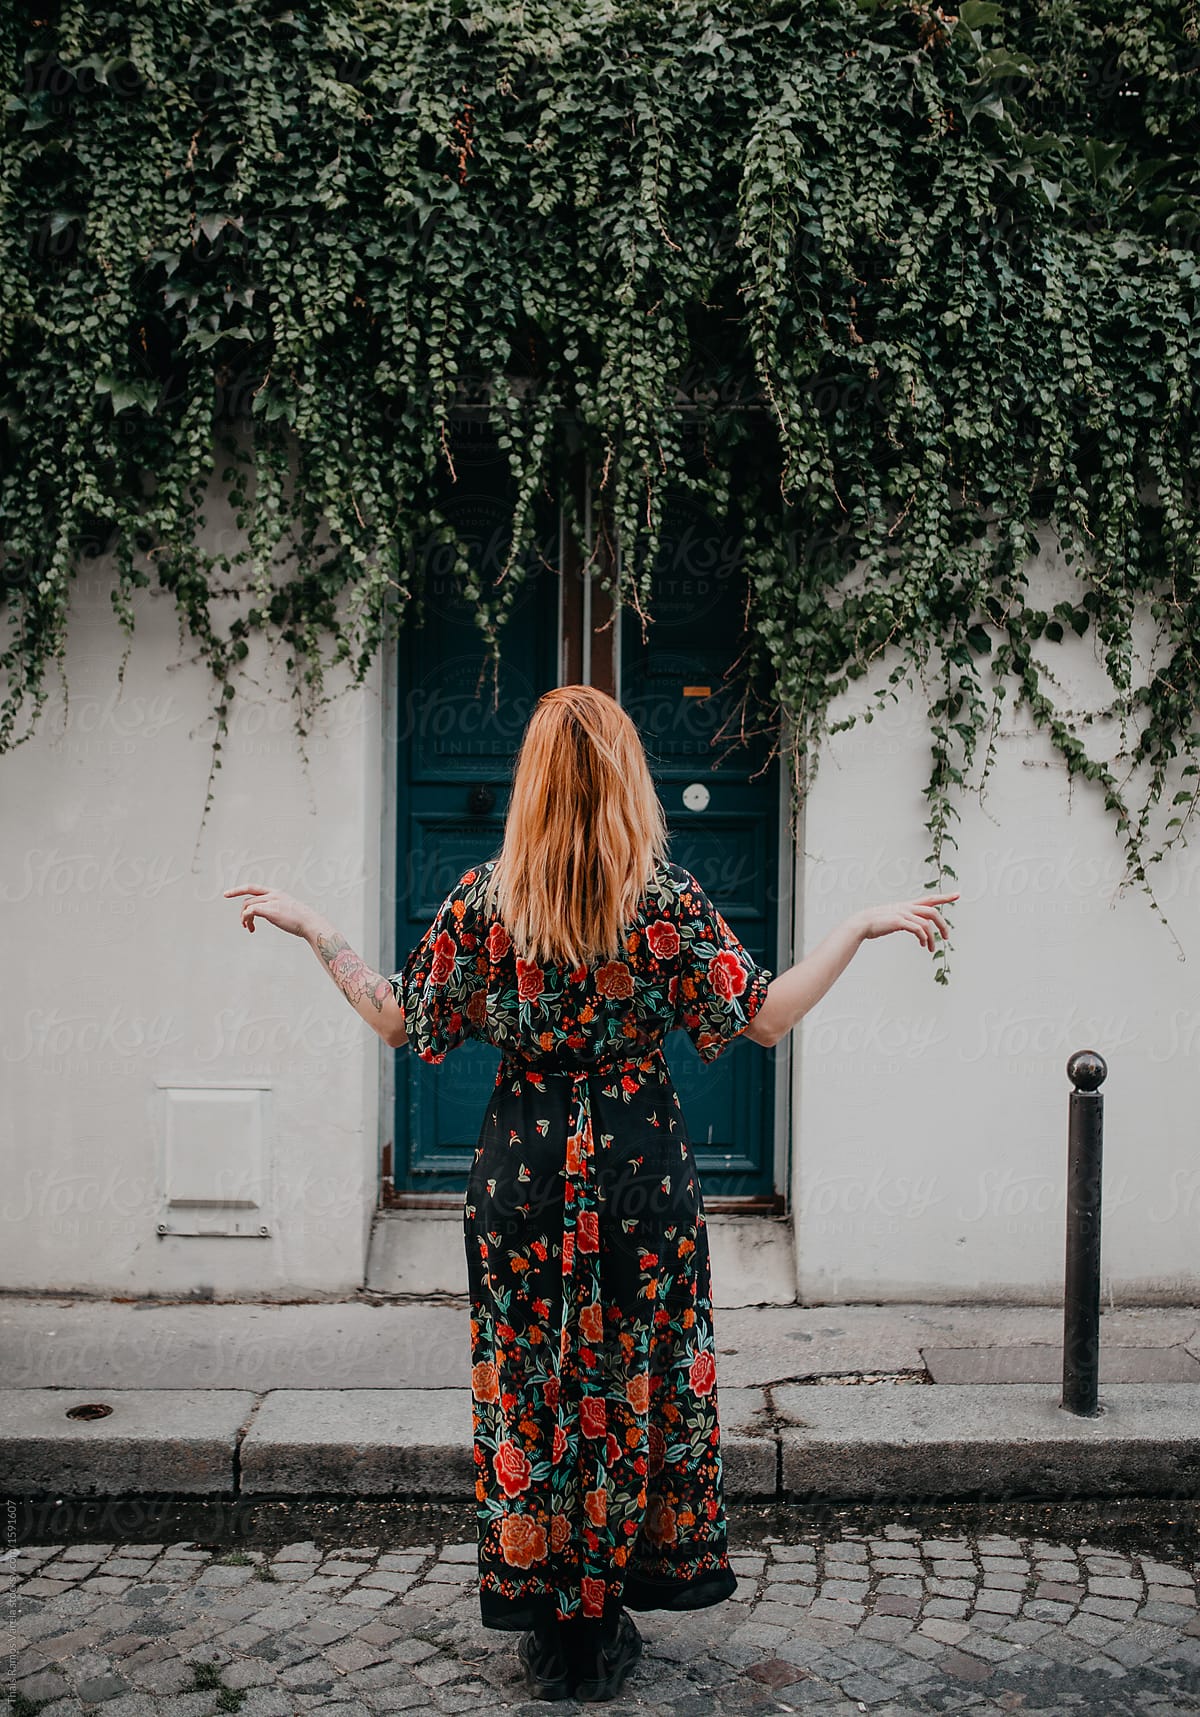 Ginger Woman Wearing A Floral Dress In The Streets Of Paris By Stocksy Contributor Thais